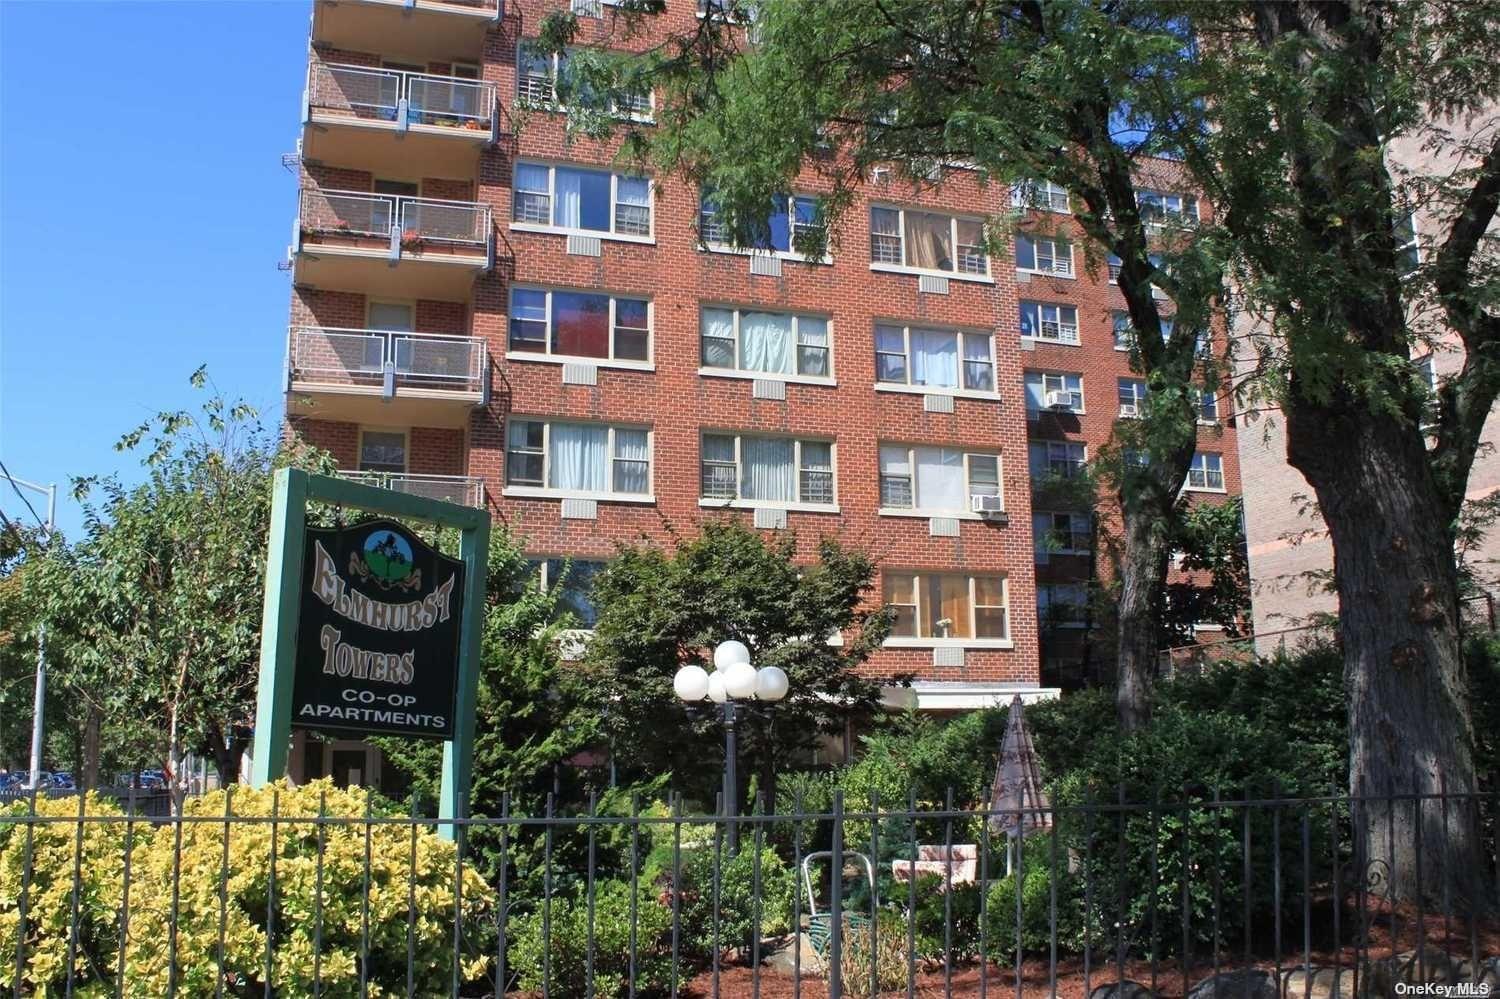 81-11 45th Ave #3 in Queens, Elmhurst, NY 11373